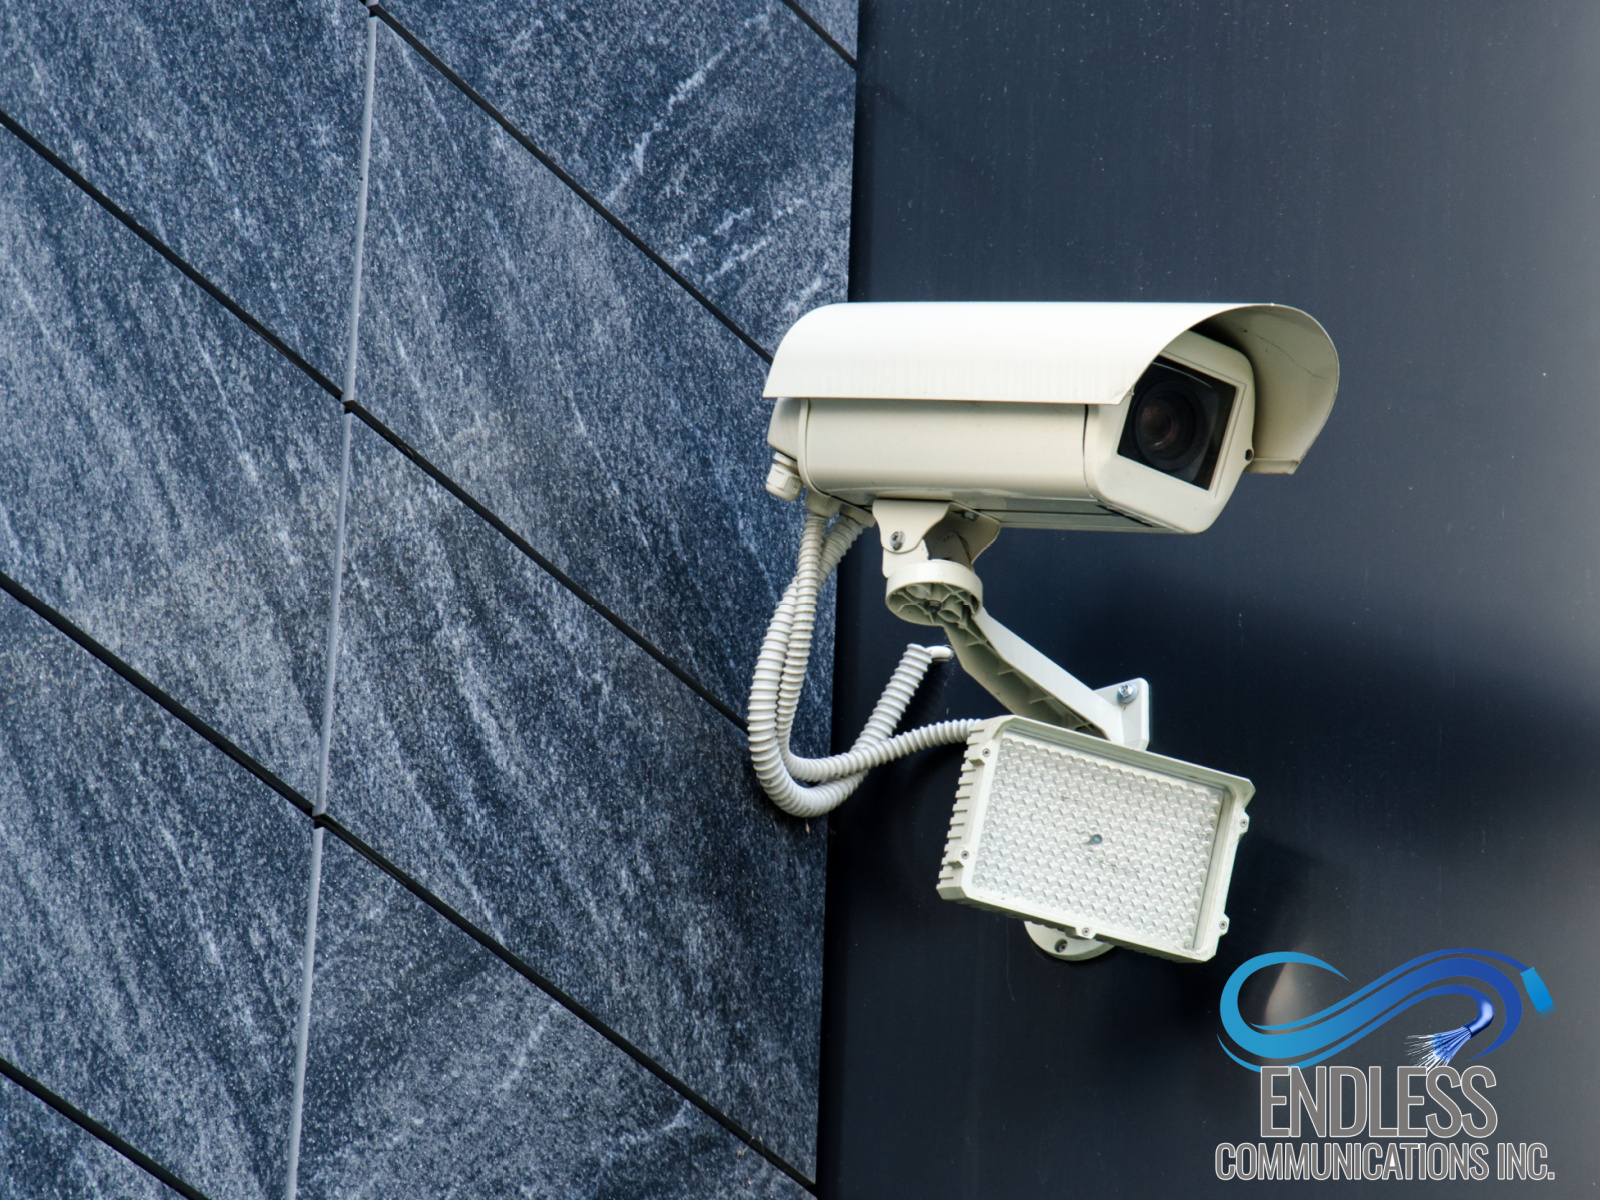 Enhance Security with Our Top-Notch Security Camera Service in Pasadena